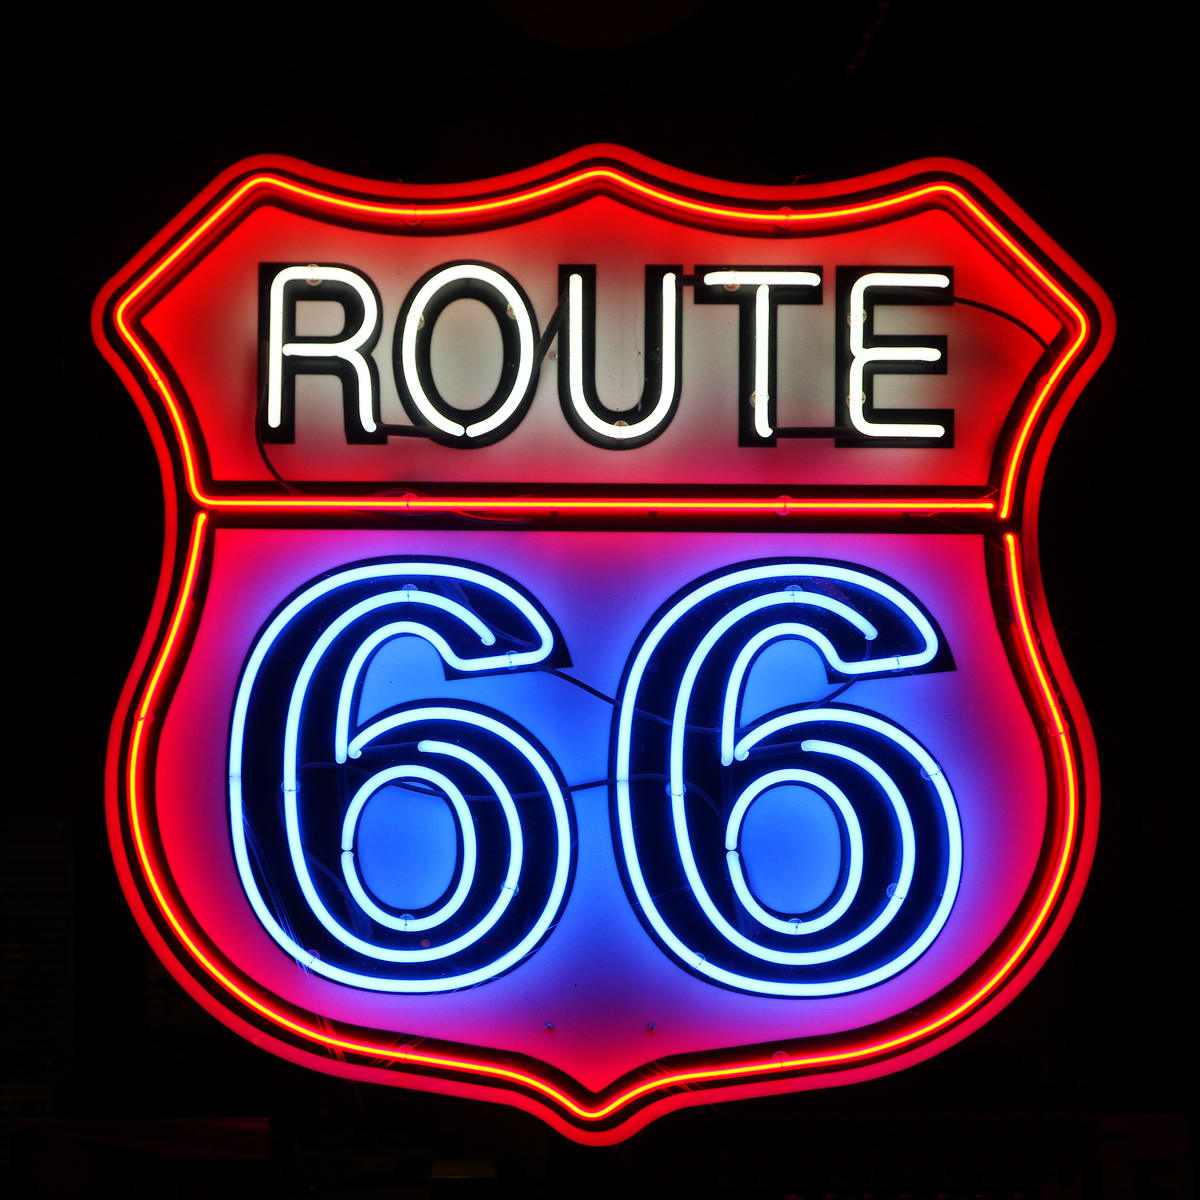 Route 66- Neon Sign by Mark Peacock  Image: Photograph